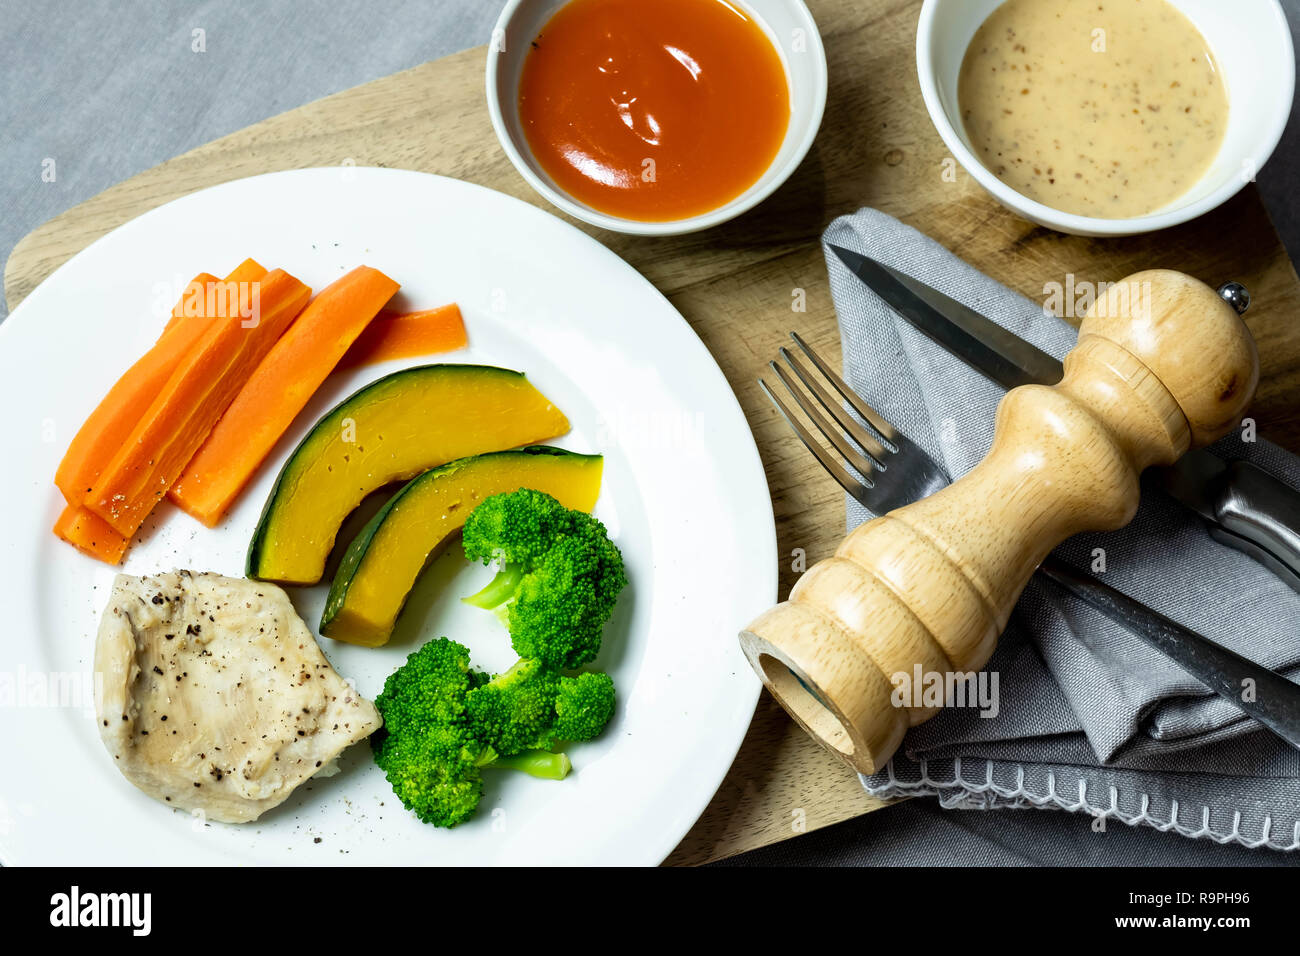 Grilled chicken steak with broccoli, pumpkin and carrot boiled, dinner food. Stock Photo